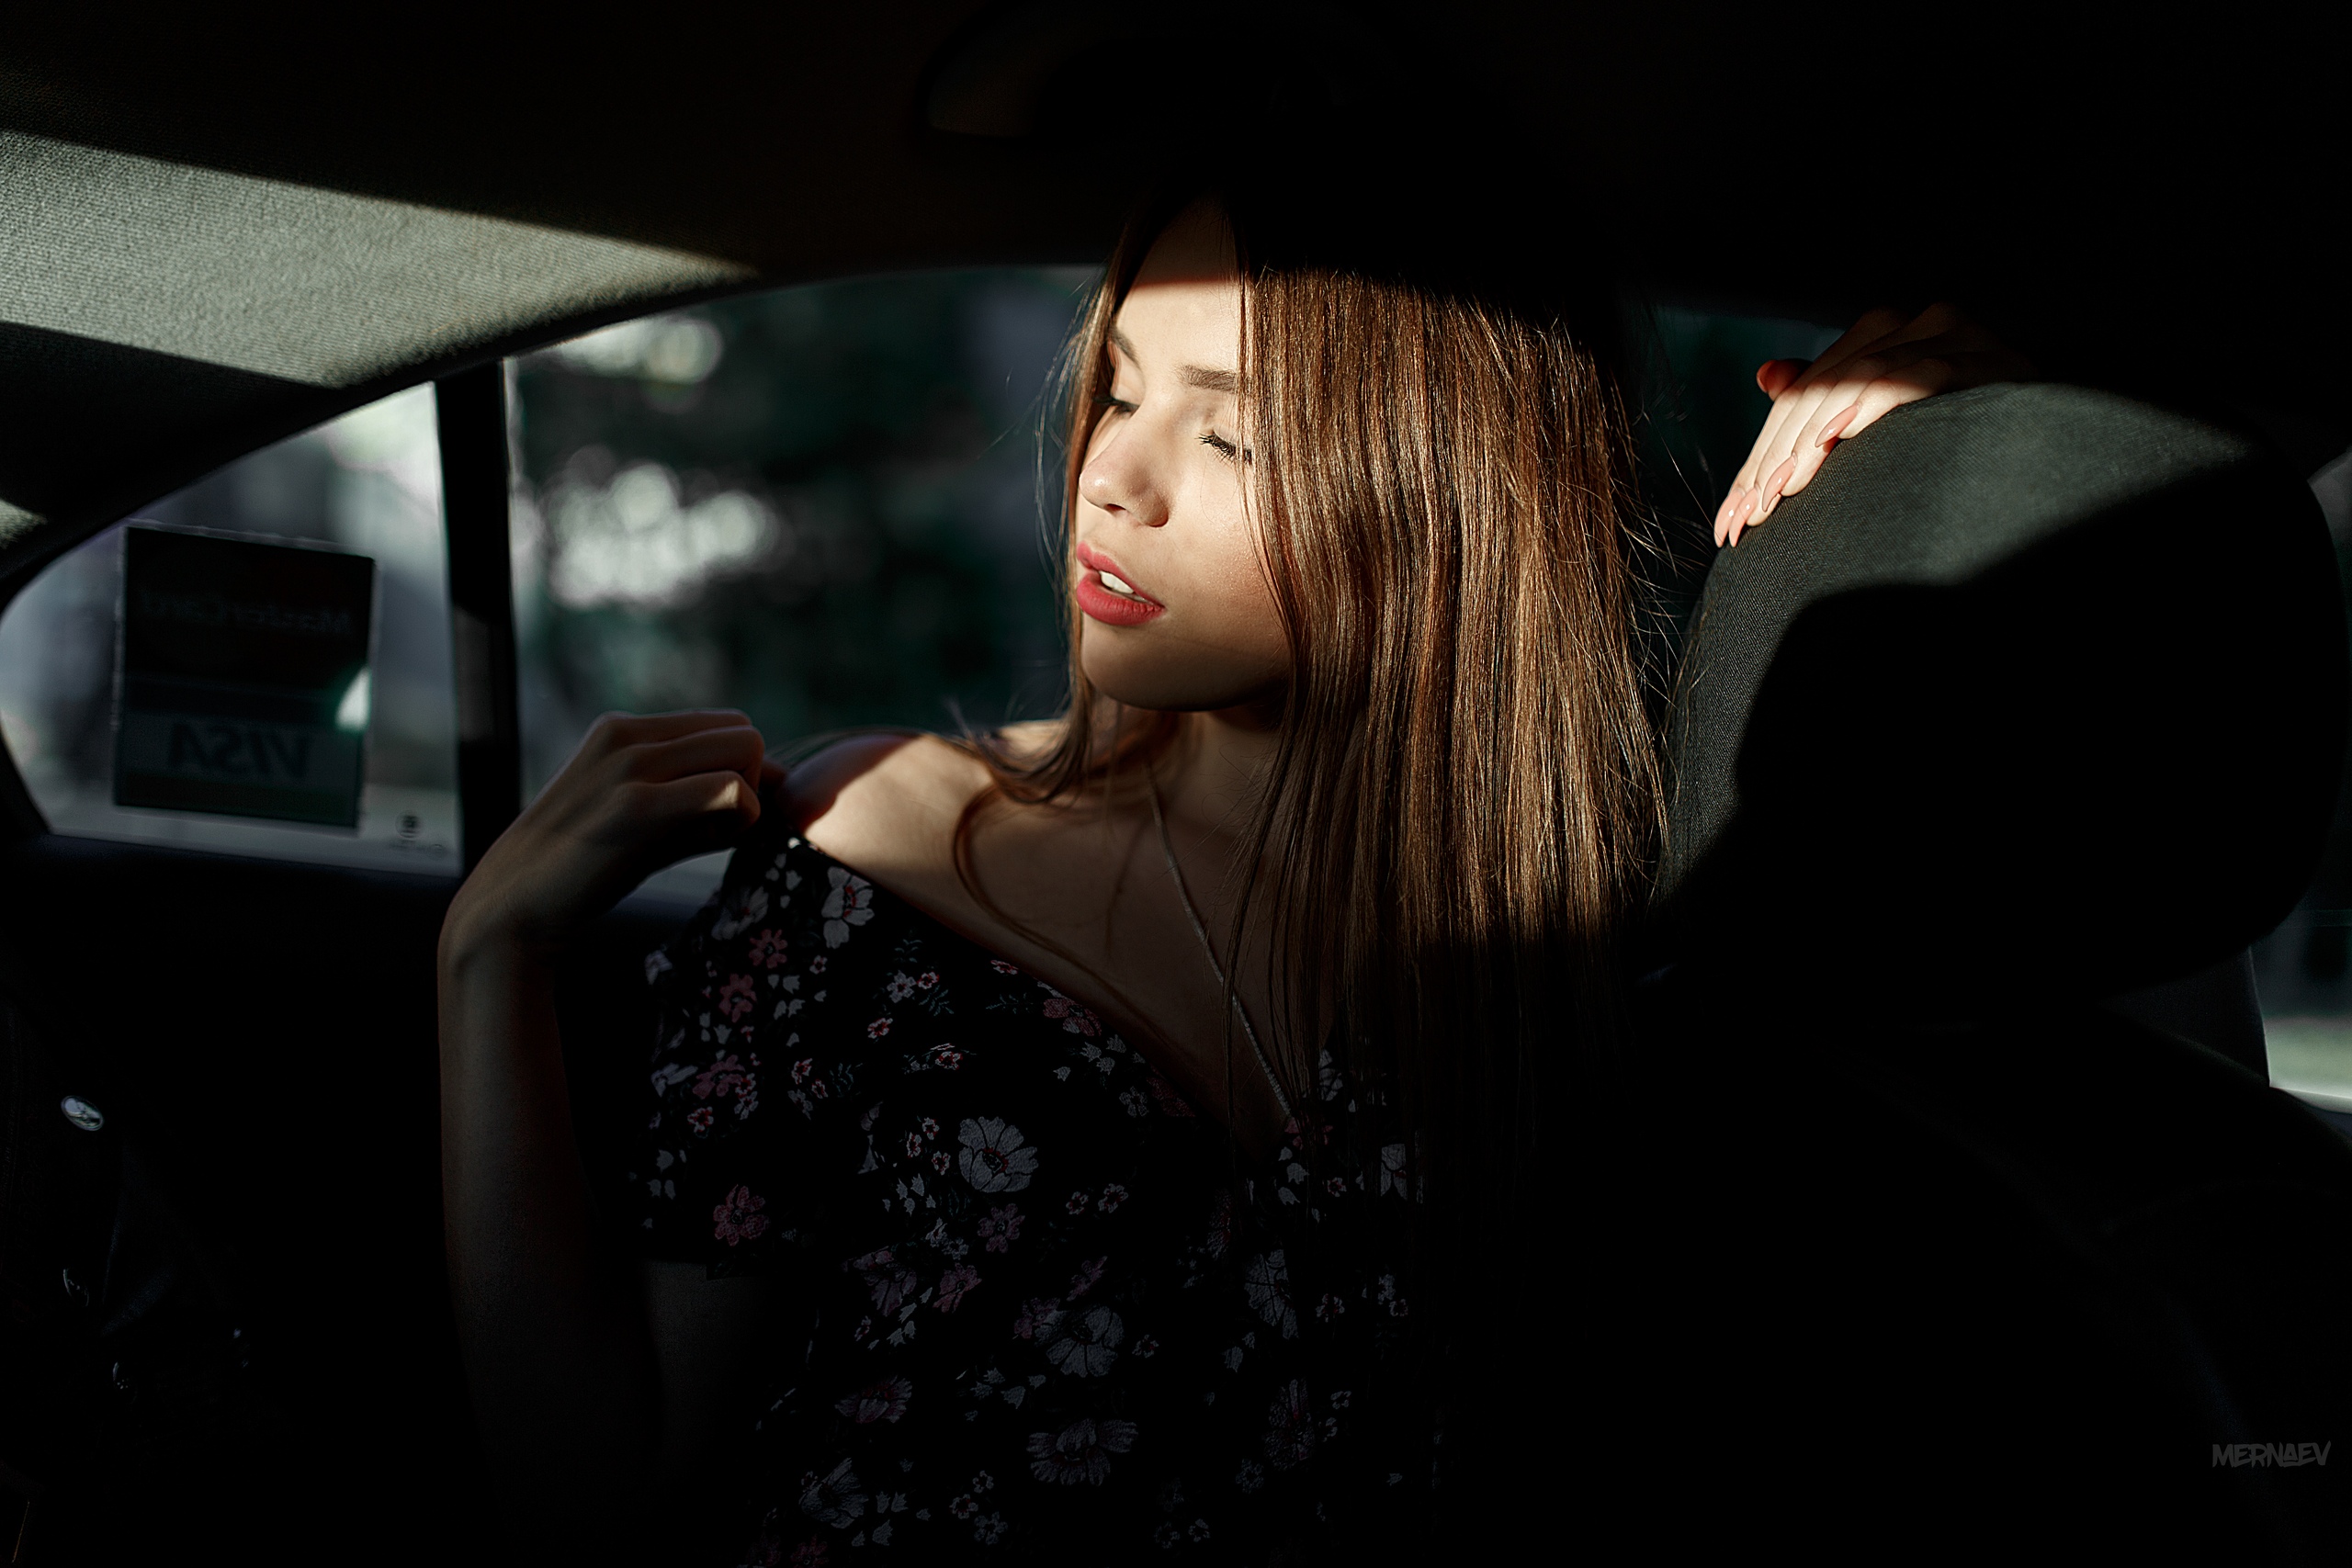 People 2560x1707 Artyom Mernaev women model brunette sun rays closed eyes necklace dress portrait car interior depth of field painted nails dark face sitting in the car